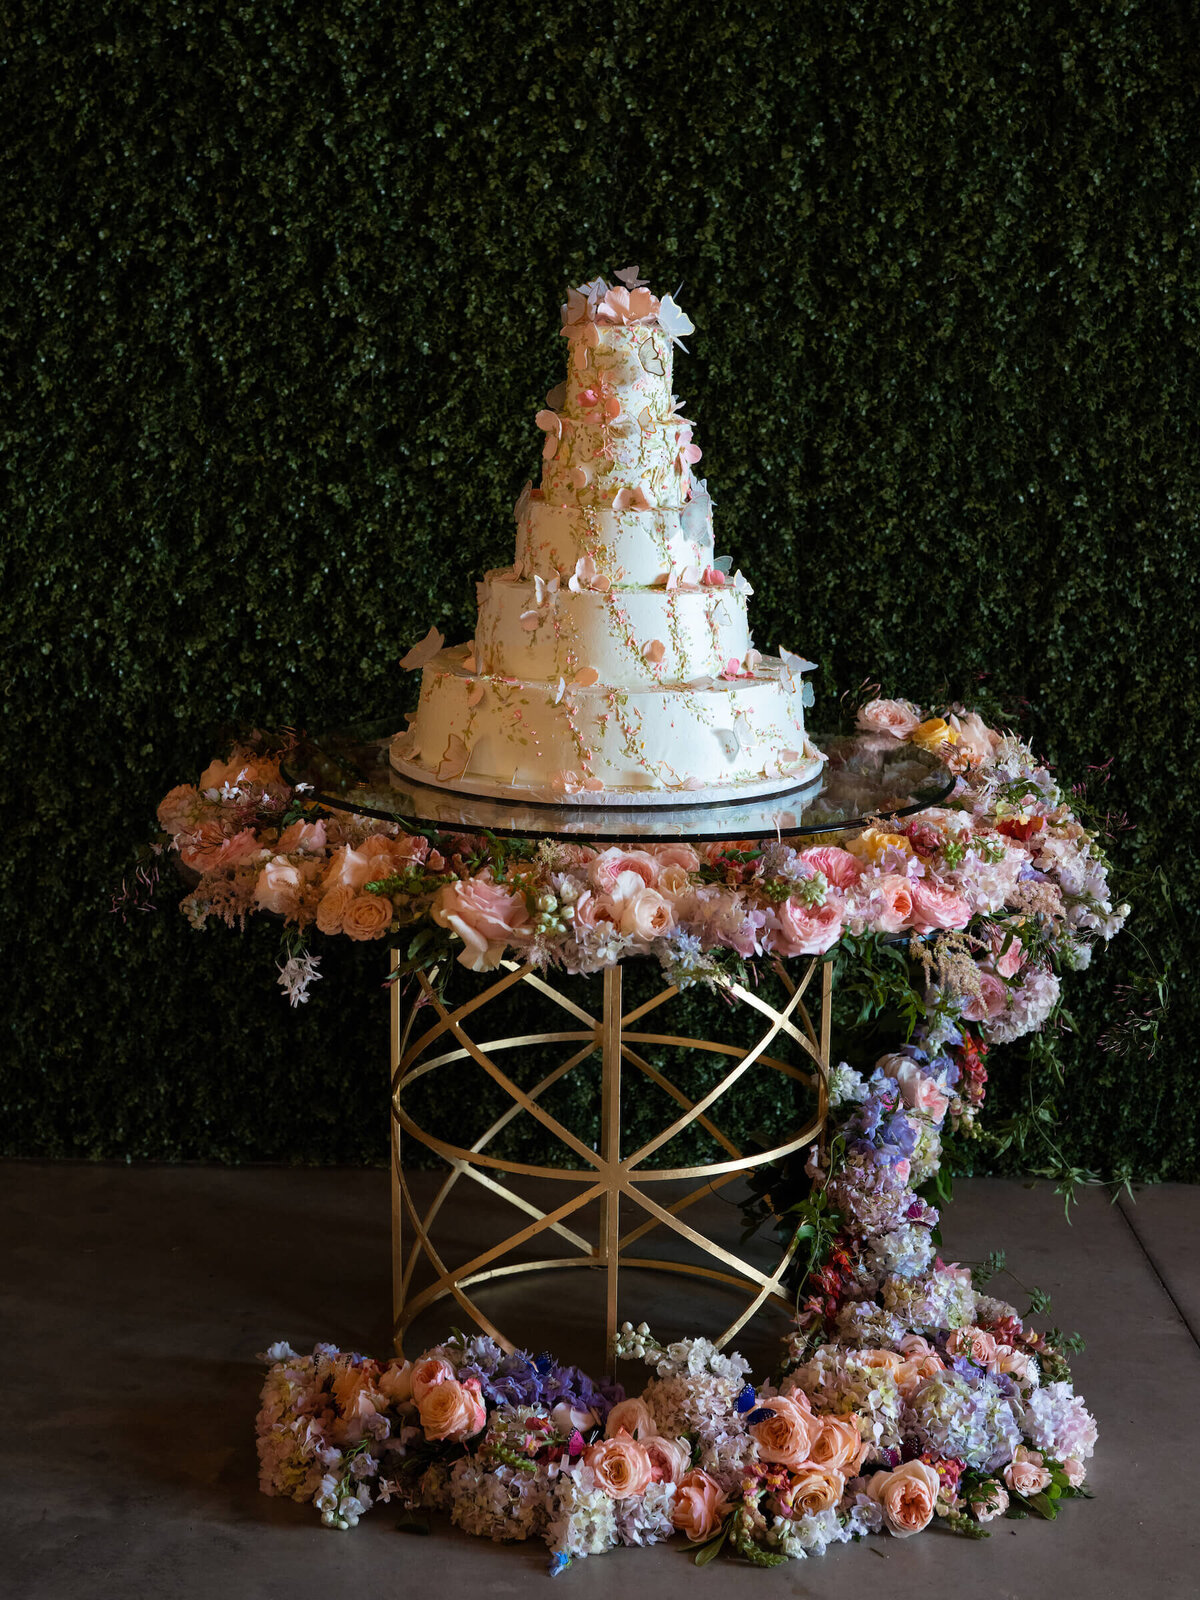 Pastel wedding cake covered in sugar flowers and edible butterflies sitting on floral cake table.